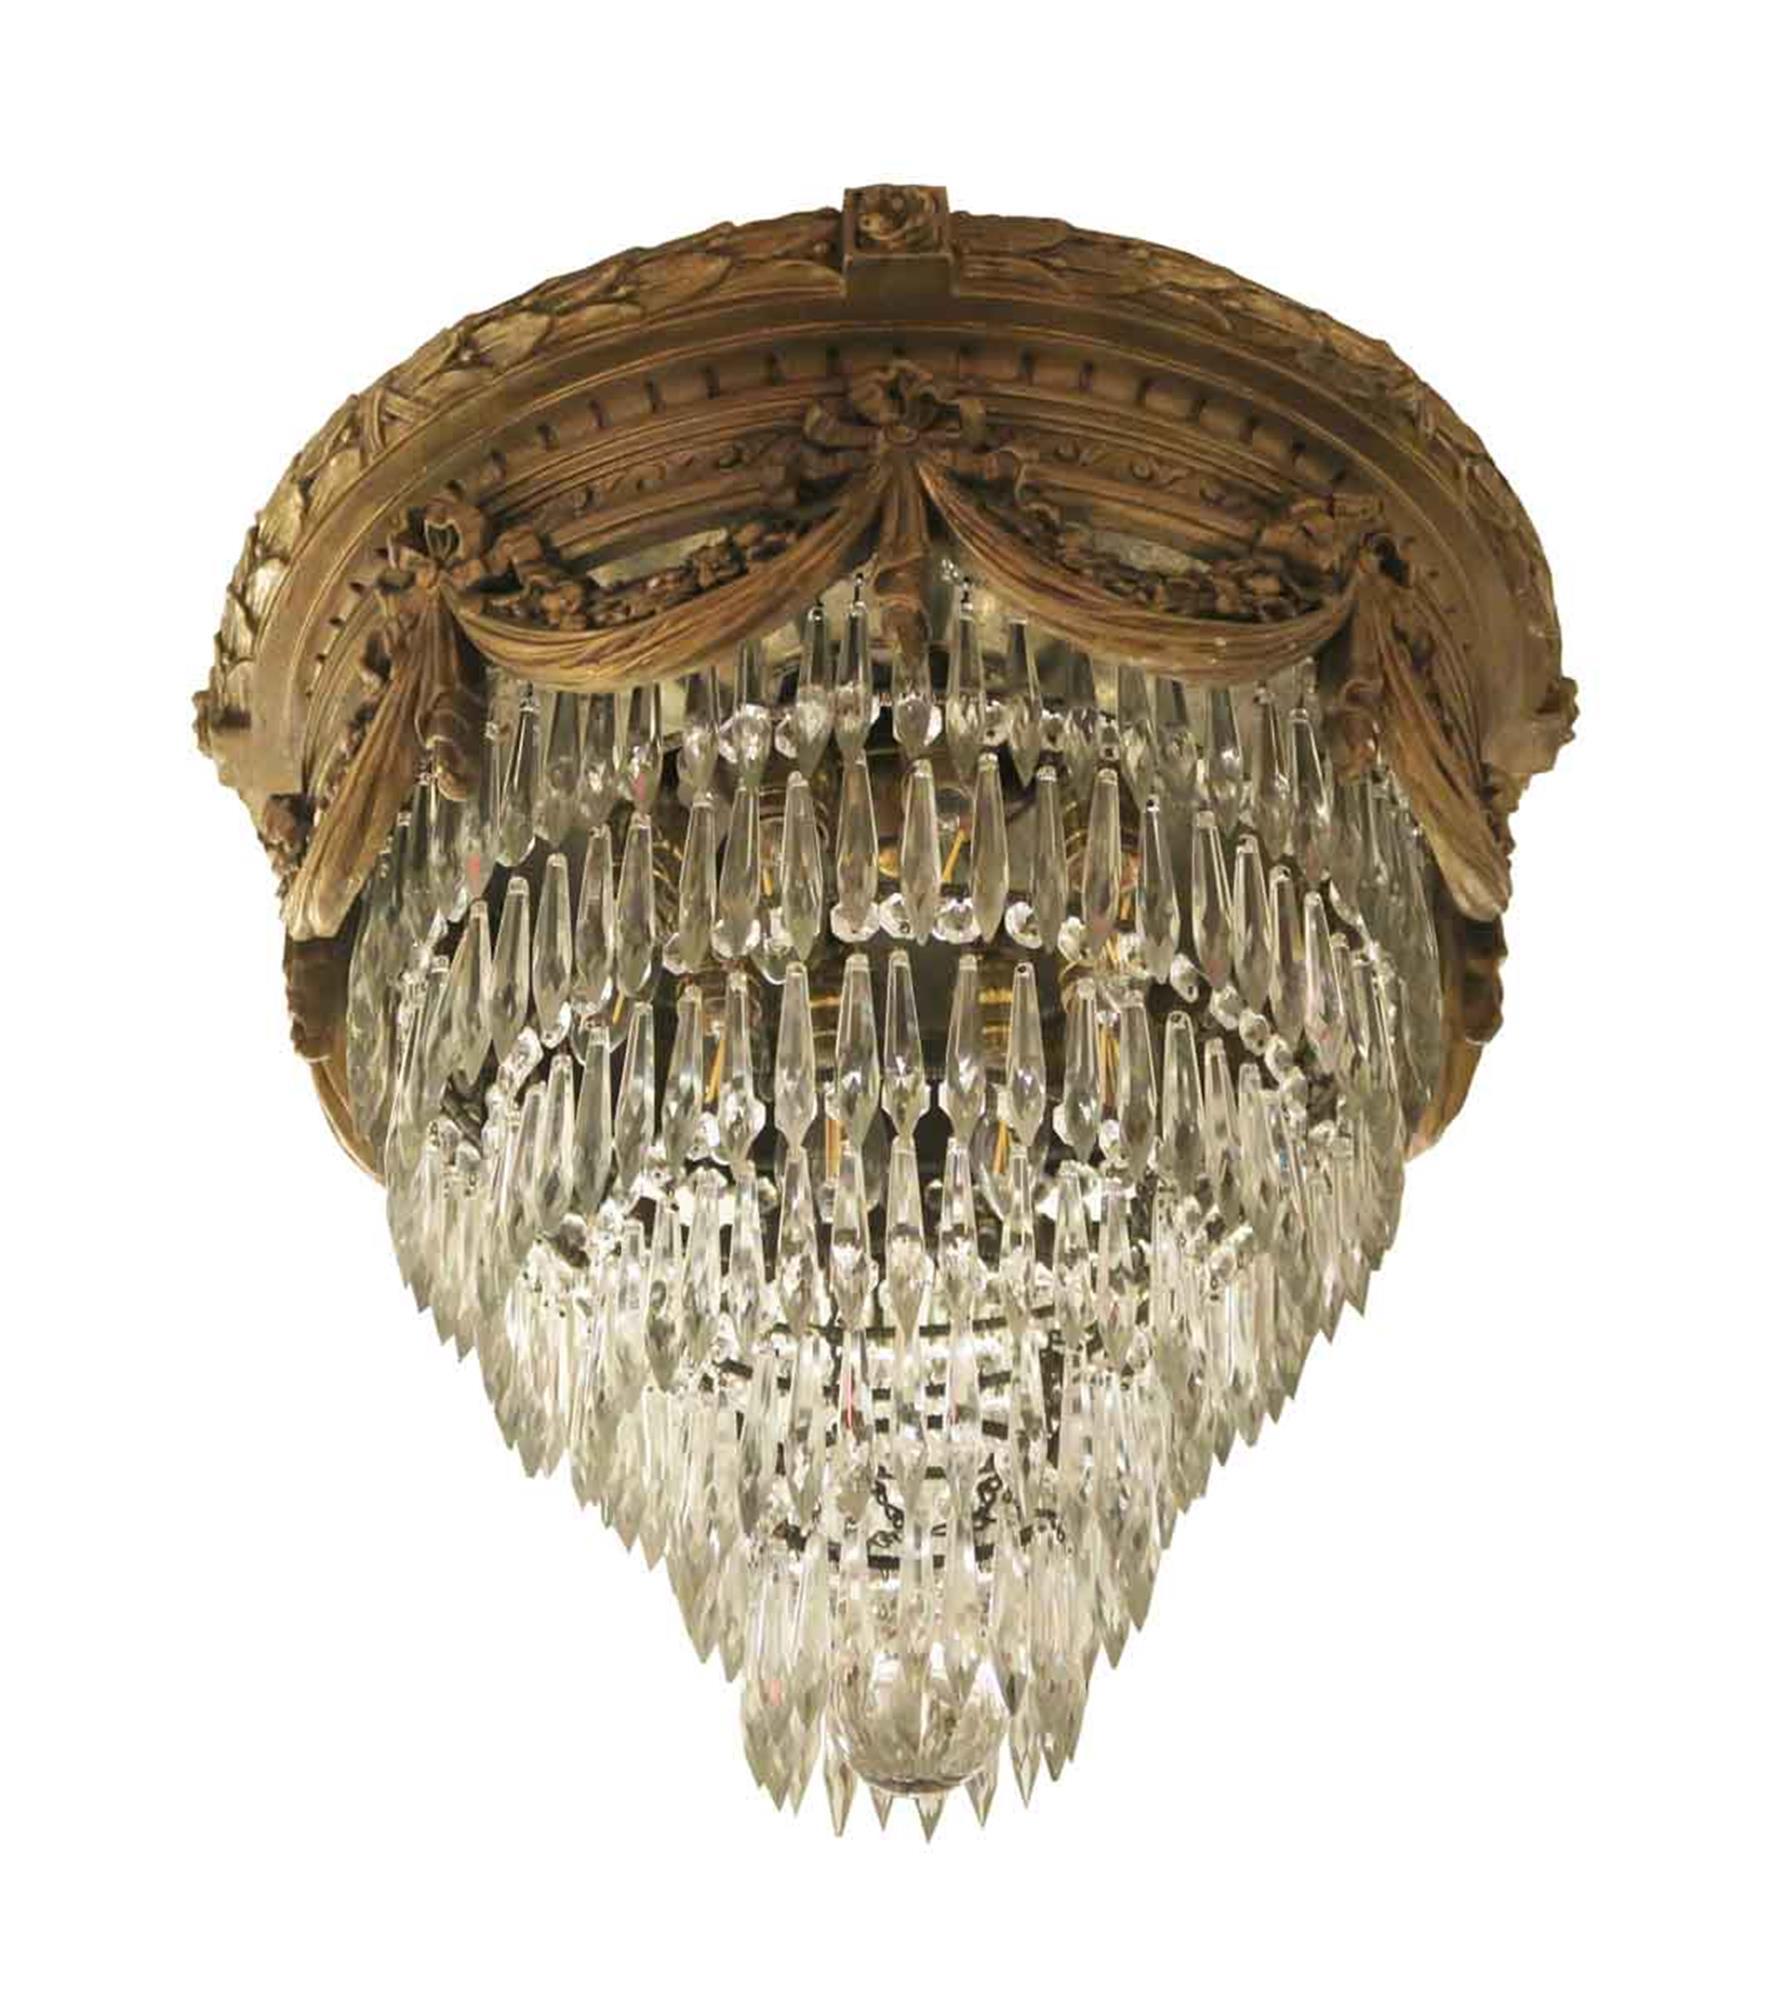 1930s clear crystal wedding cake style flush mount light with a decorative gold gesso frame. This light has been completely restored. This can be seen at our 2420 Broadway location on the upper west side in Manhattan.